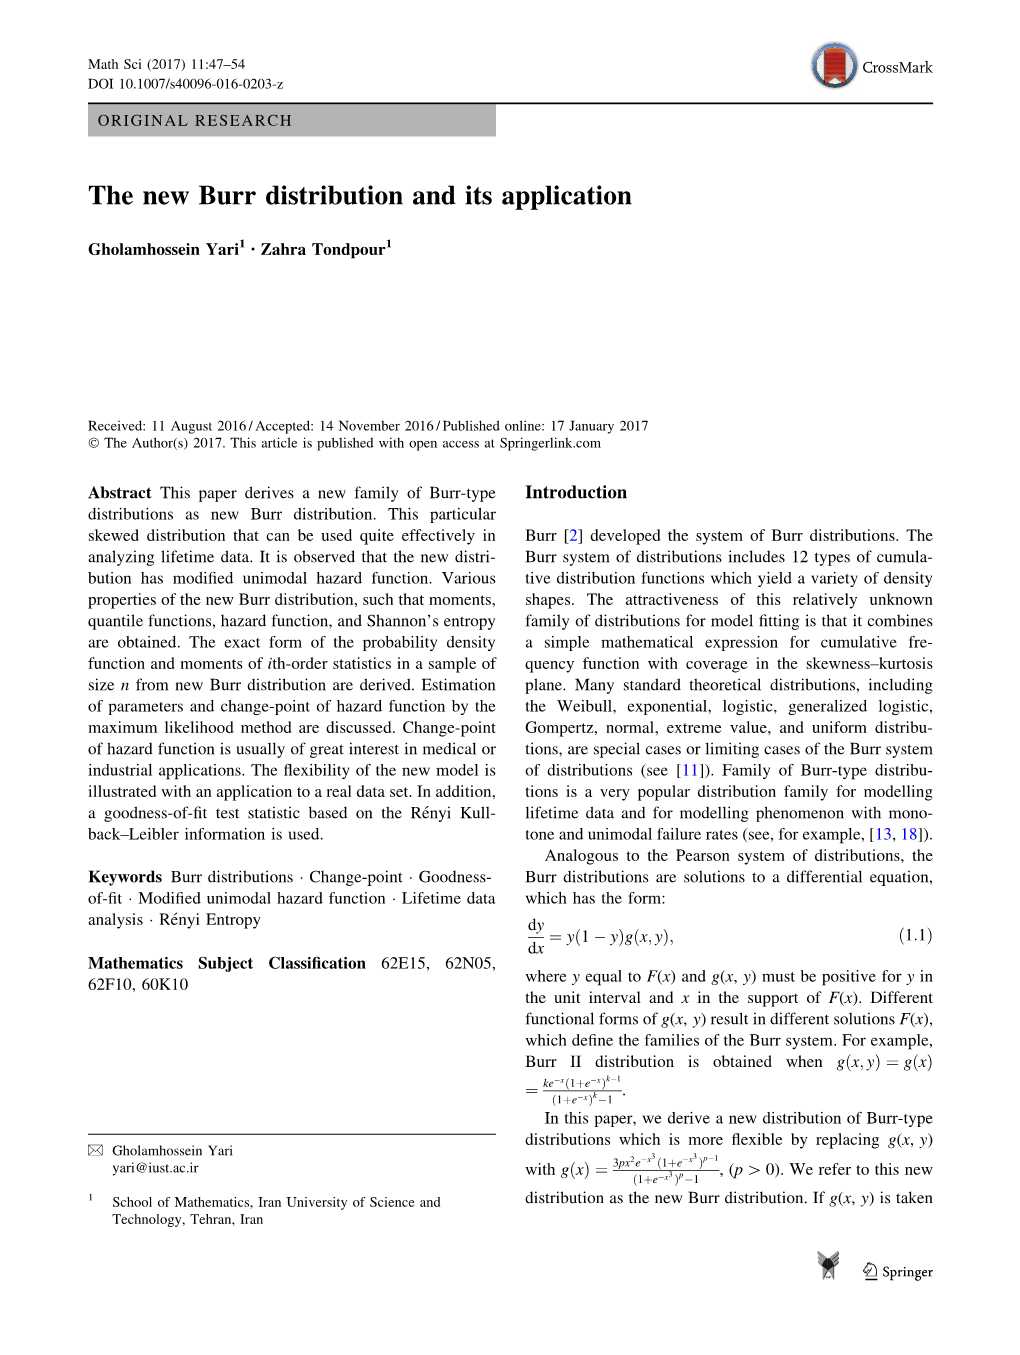 The New Burr Distribution and Its Application